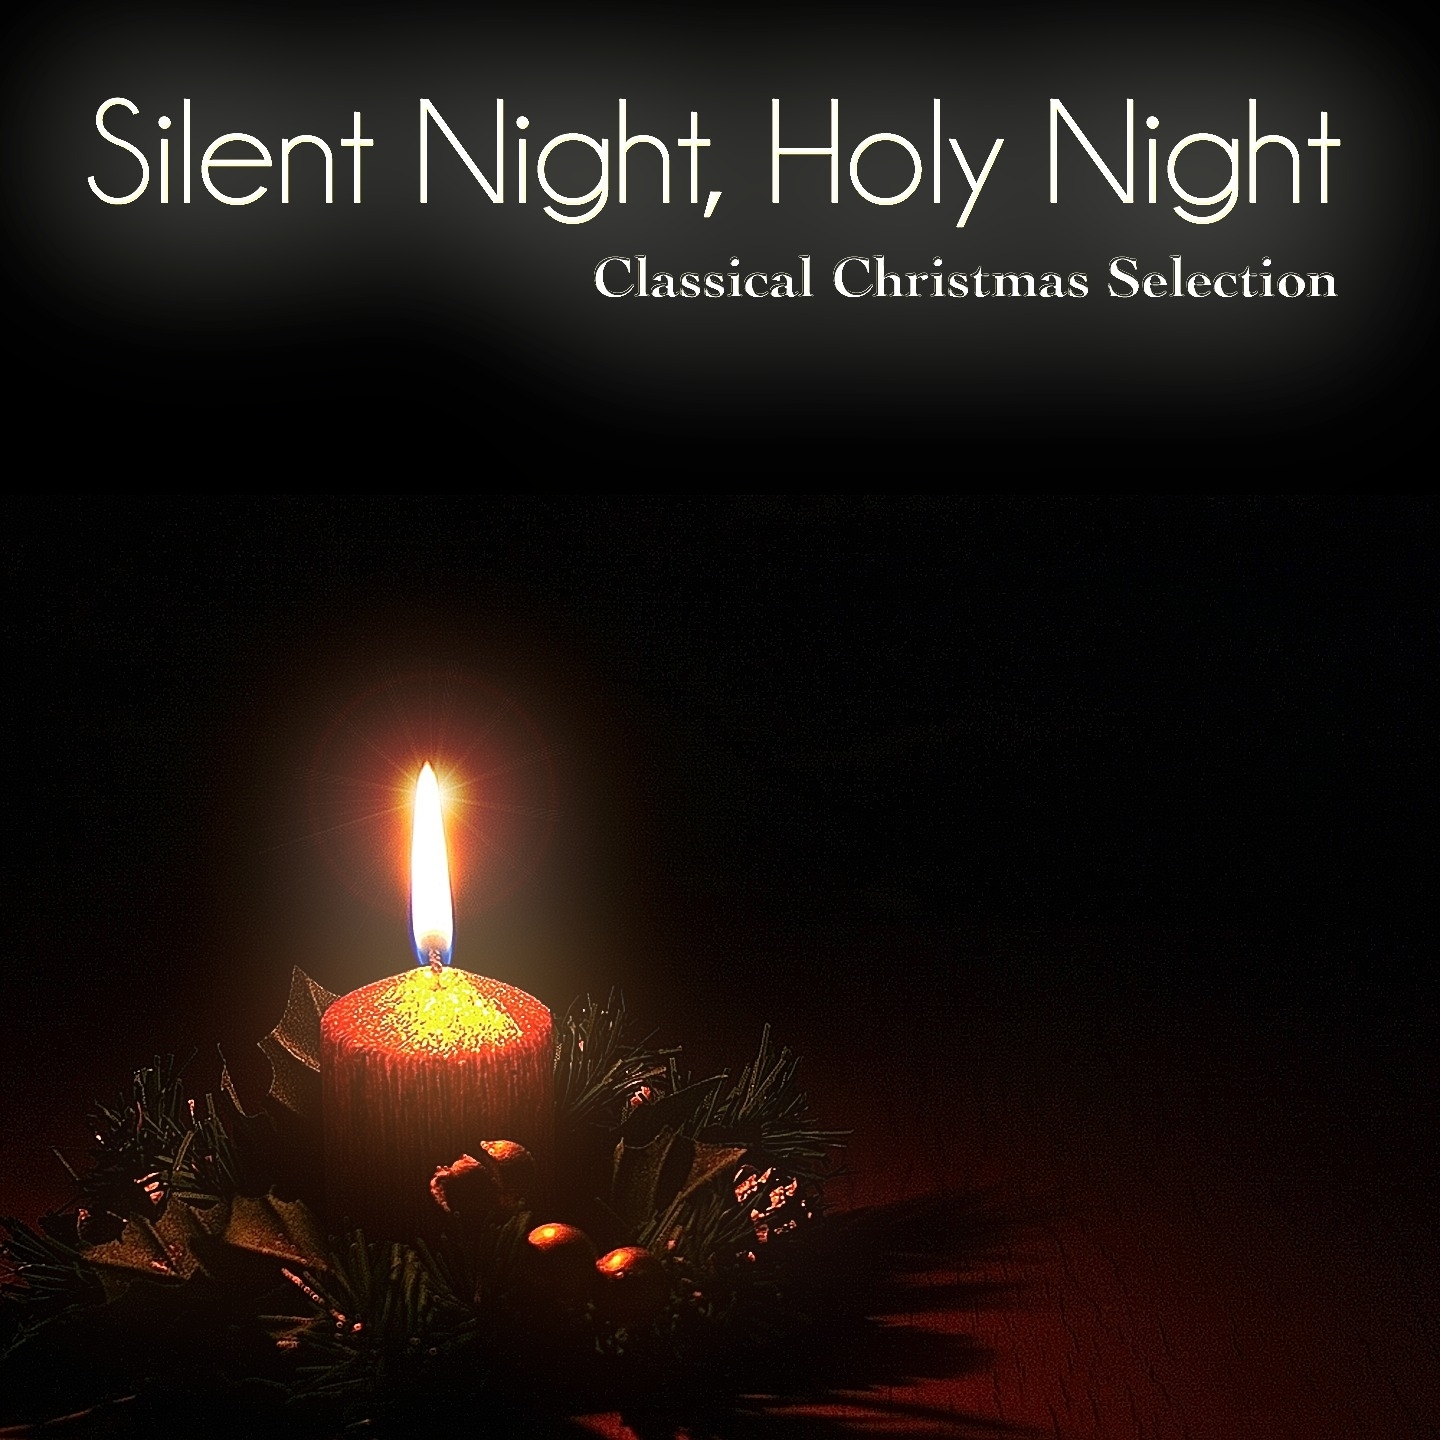 Cantique De Noel (O Holy Night - Remastered)